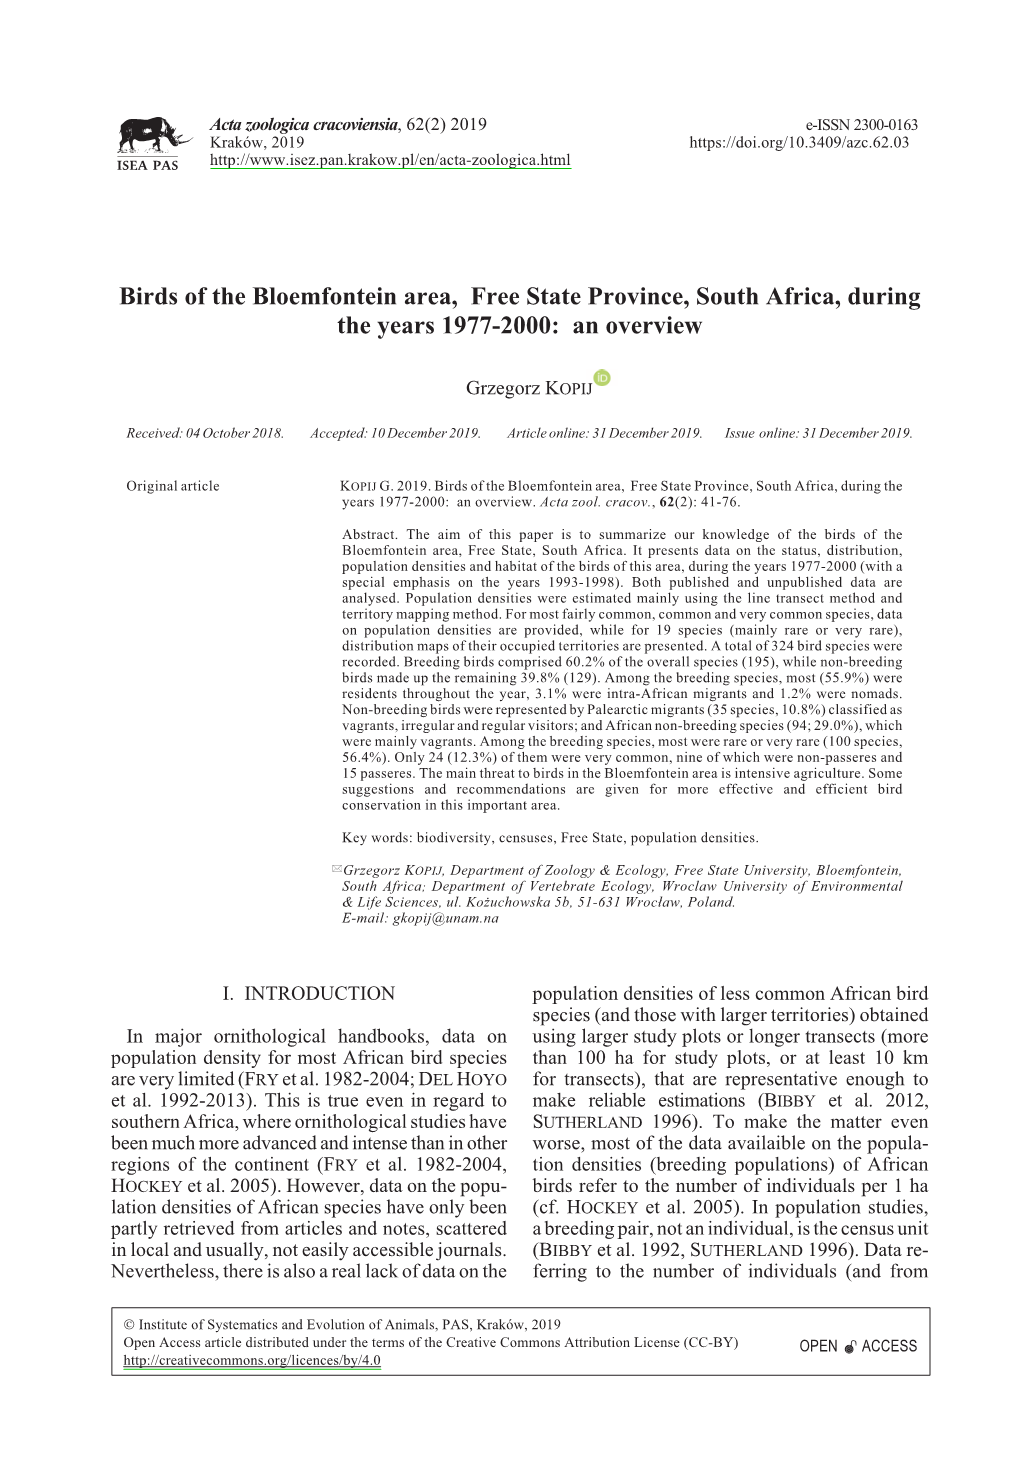 Birds of the Bloemfontein Area, Free State Province, South Africa, During the Years 1977-2000: an Overview